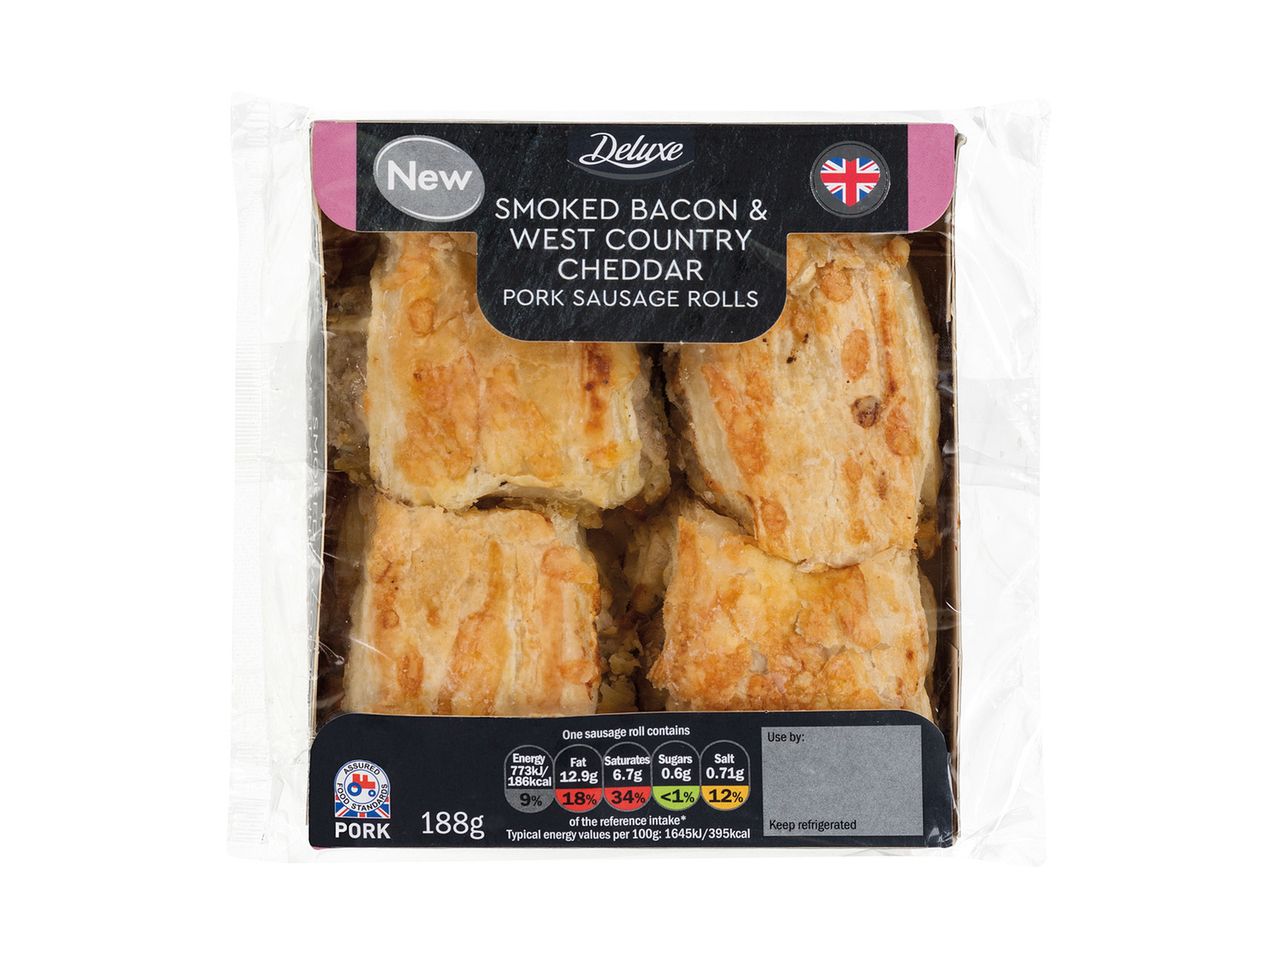 Go to full screen view: Deluxe Premium Sausage Rolls - Image 2